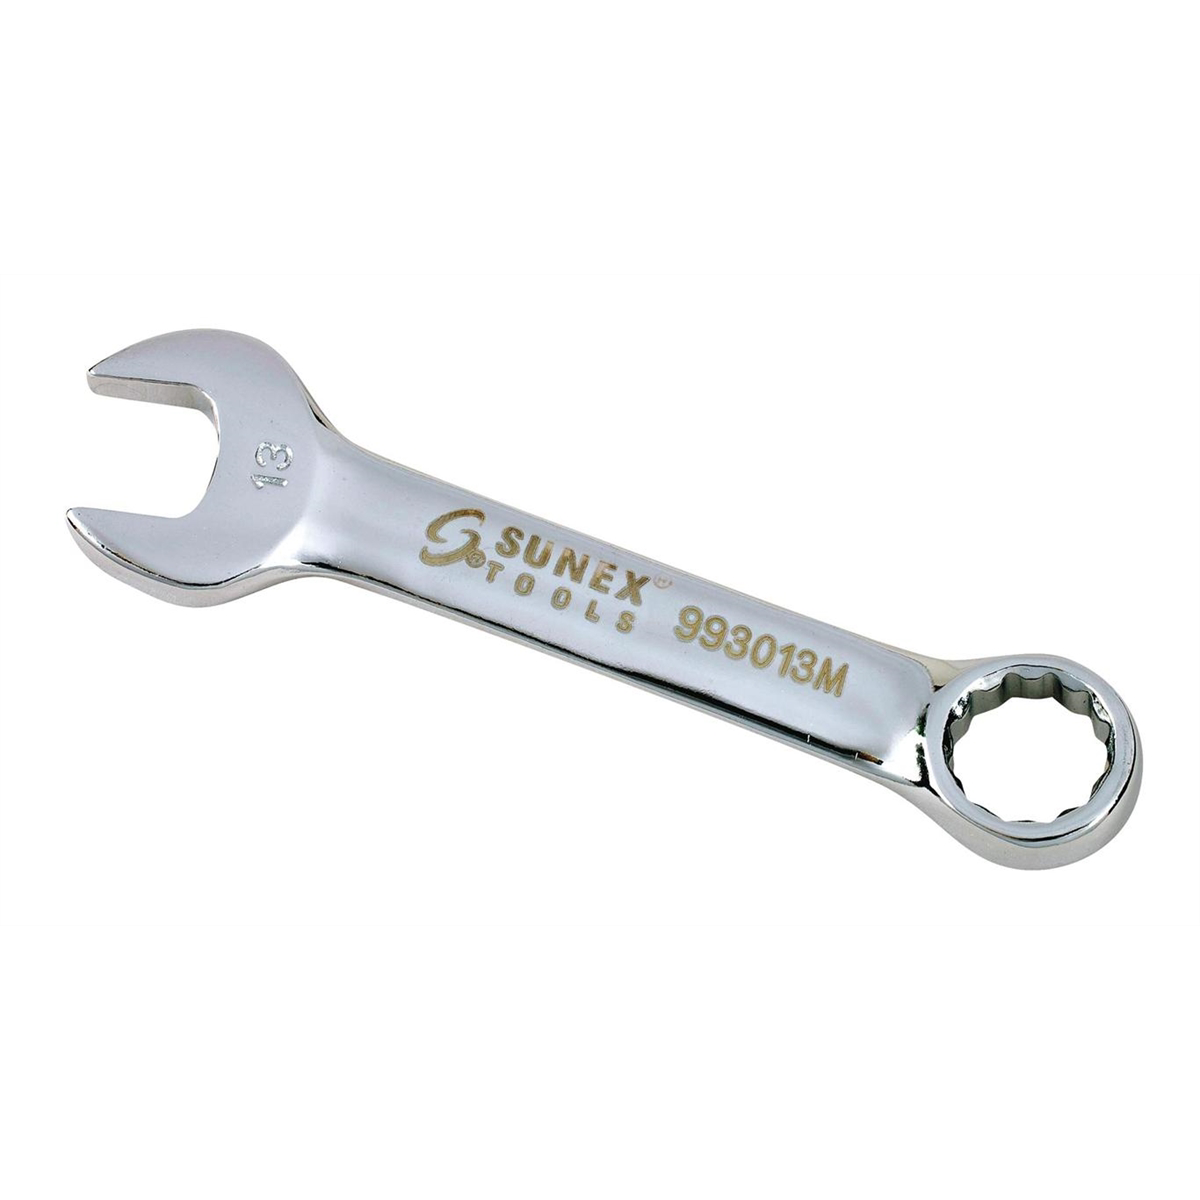 Full Polished 13MM Stubby Combination Wrench